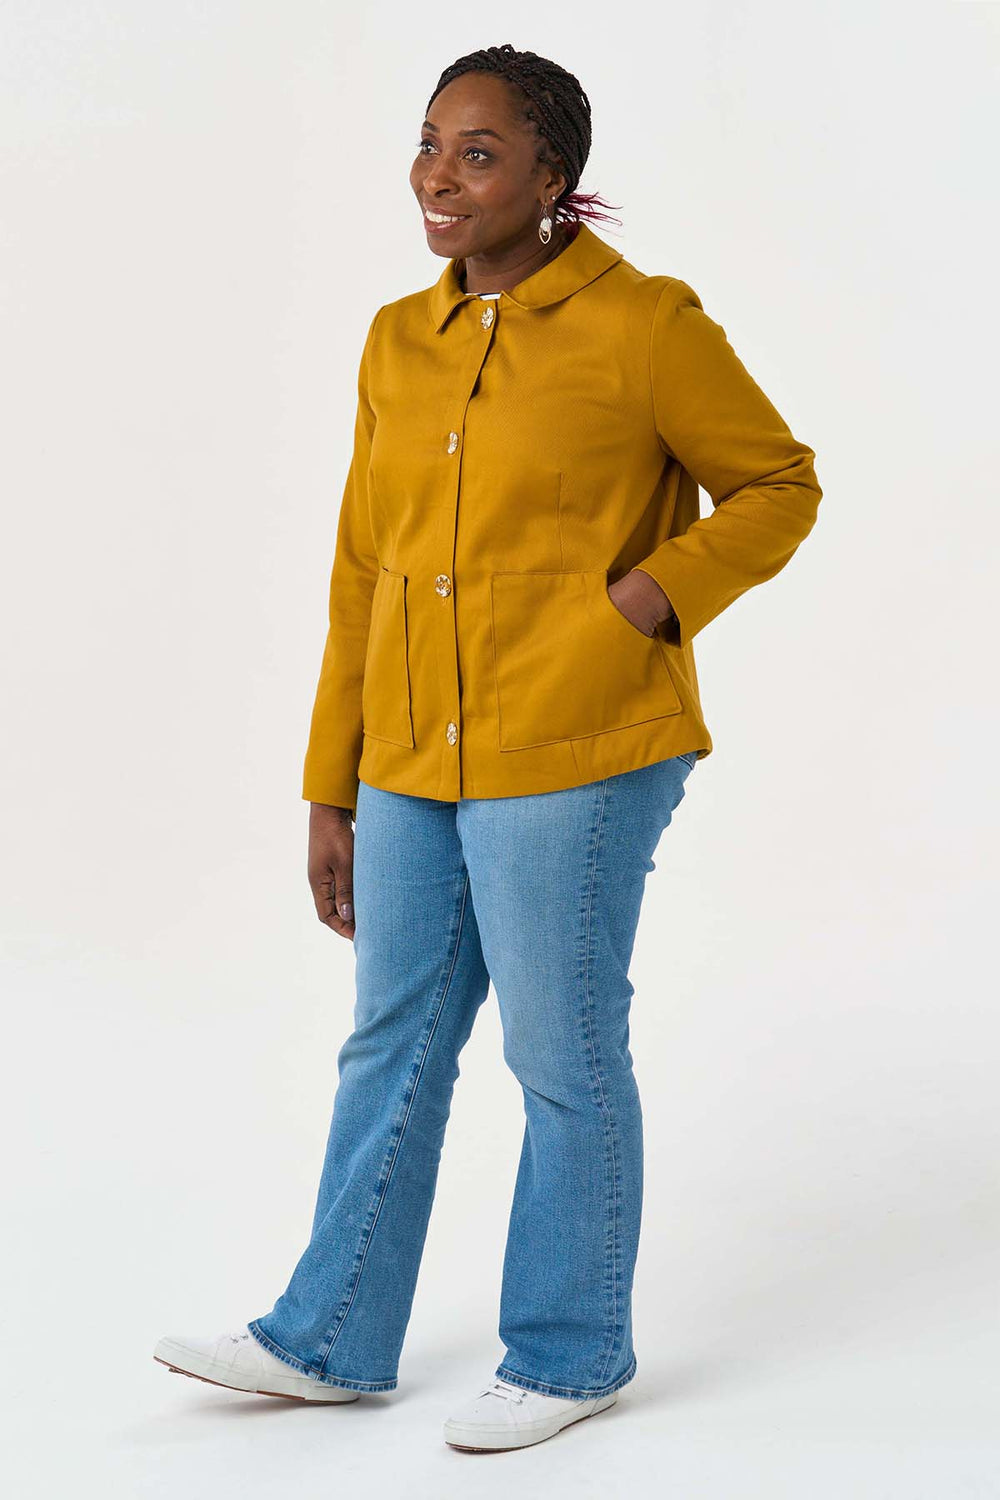 Woman wearing the Frankie Jacket sewing pattern from Sew Over It on The Fold Line. A jacket pattern made in twill, corduroy, denim, canvas, melton, jacquard and boiled wool fabrics featuring a boxy silhouette, sharp collar with partial collar stand, darte